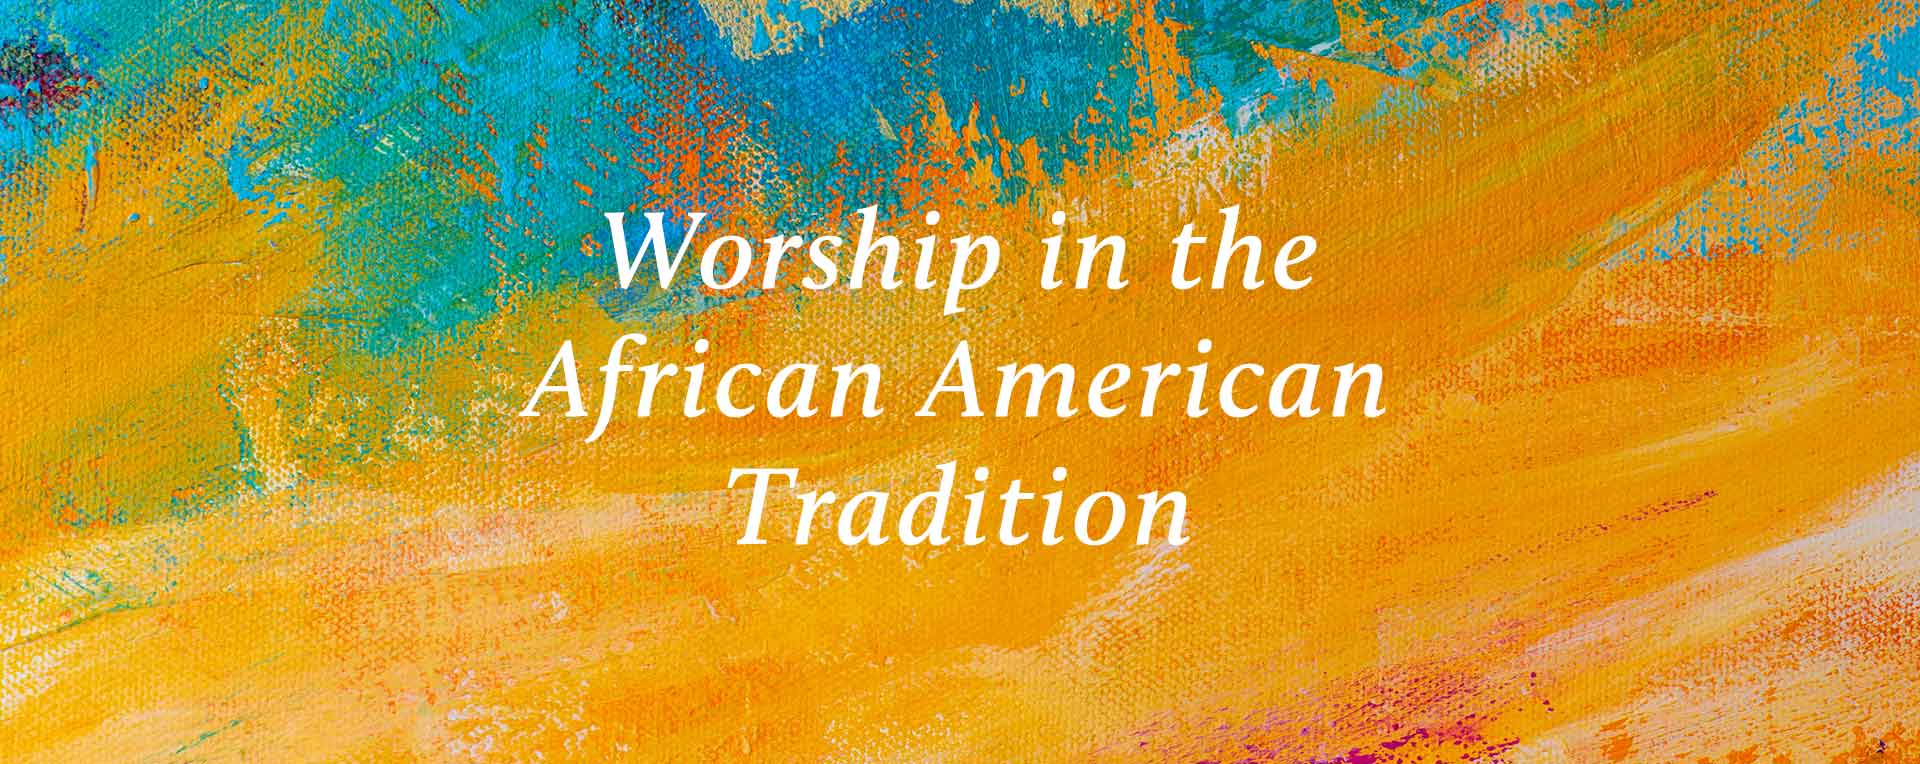 Worship in the African American Tradition printed in white with orange and blue painted background